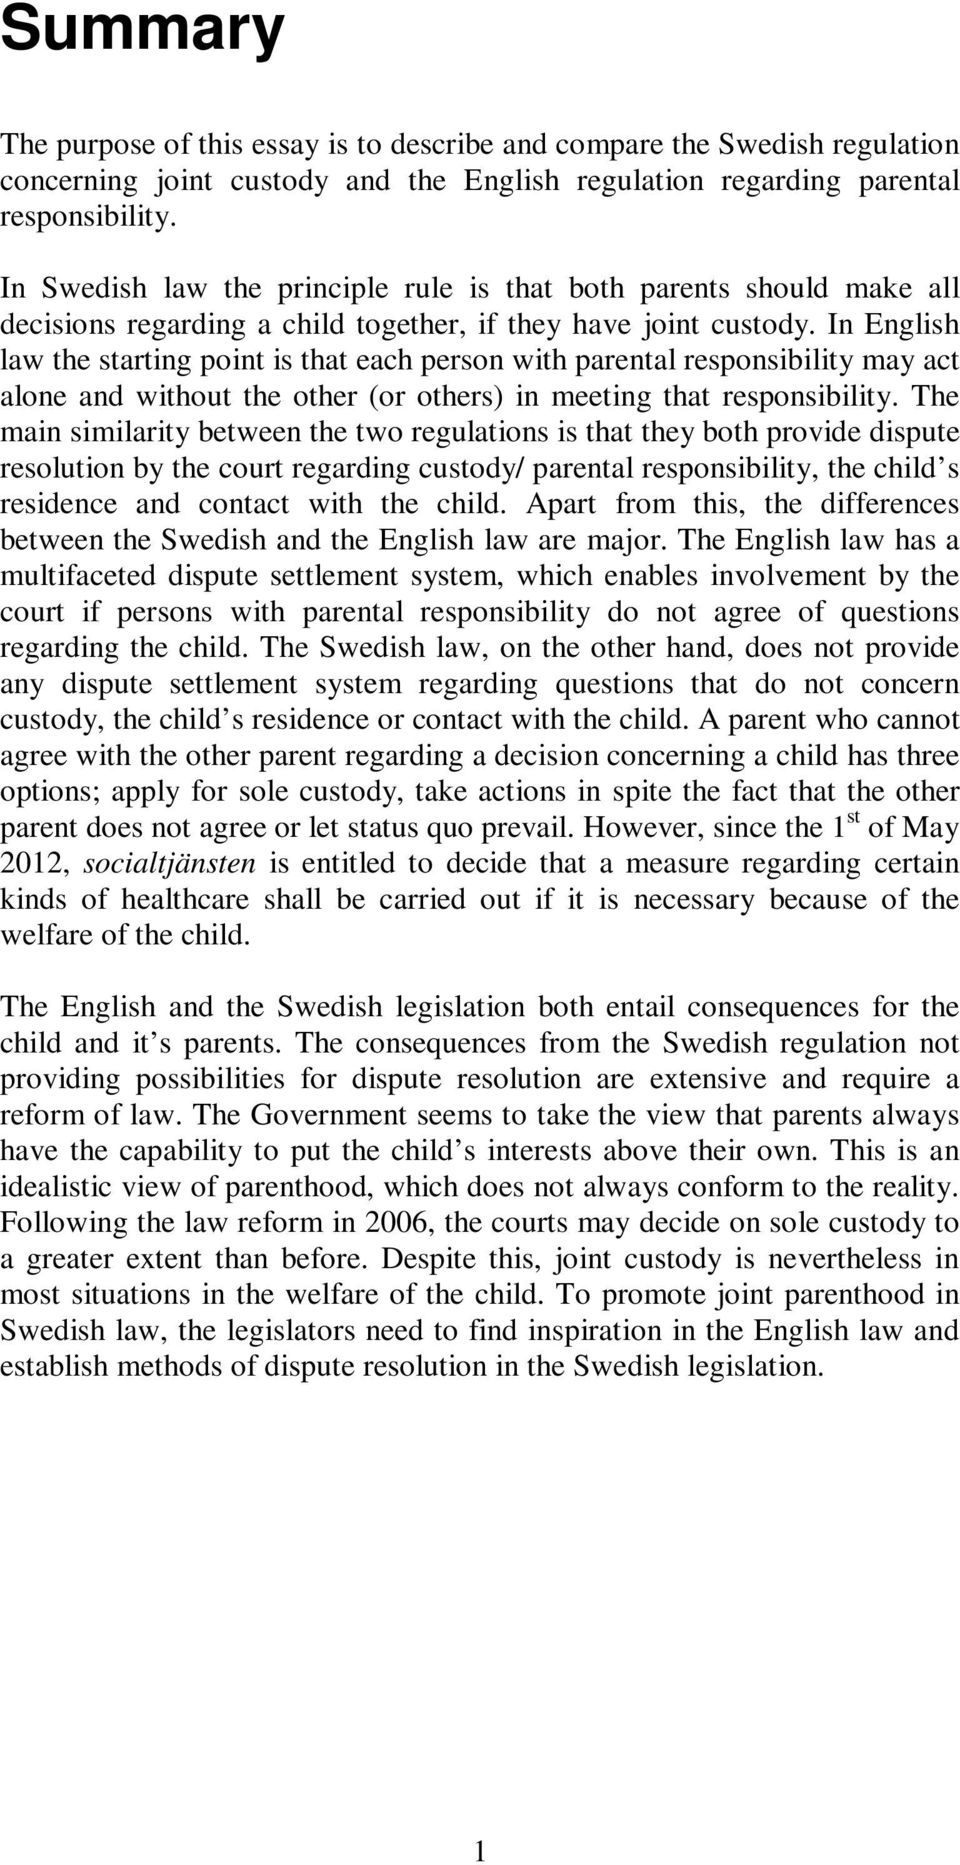 In English law the starting point is that each person with parental responsibility may act alone and without the other (or others) in meeting that responsibility.